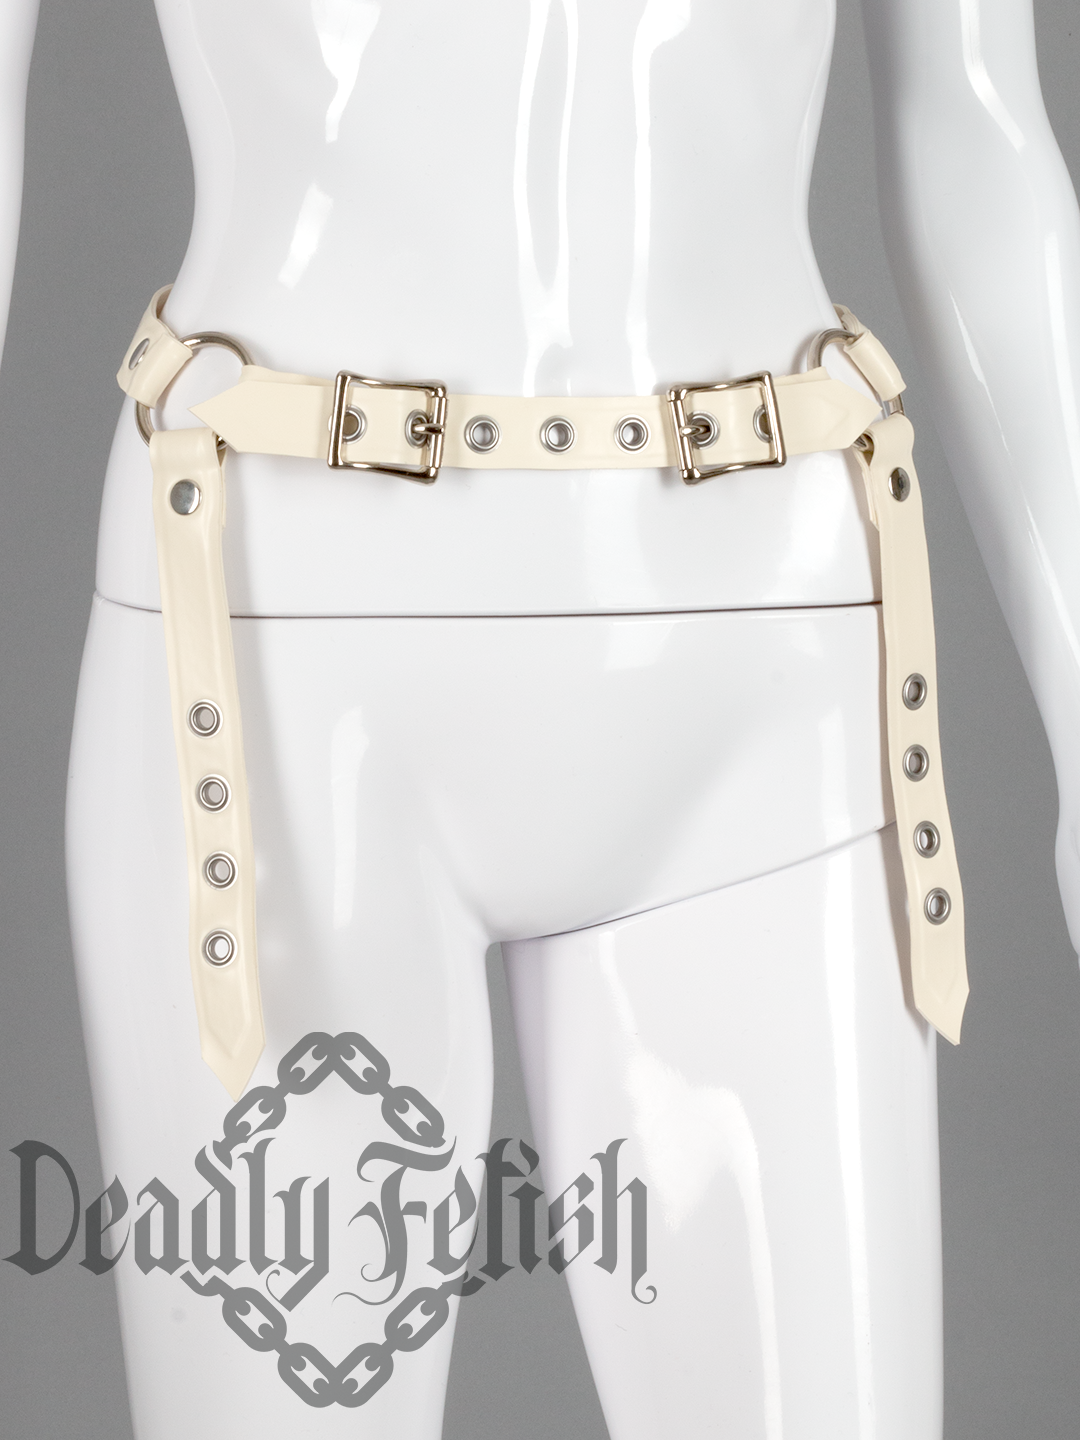 Deadly Fetish Latex: Harness #83